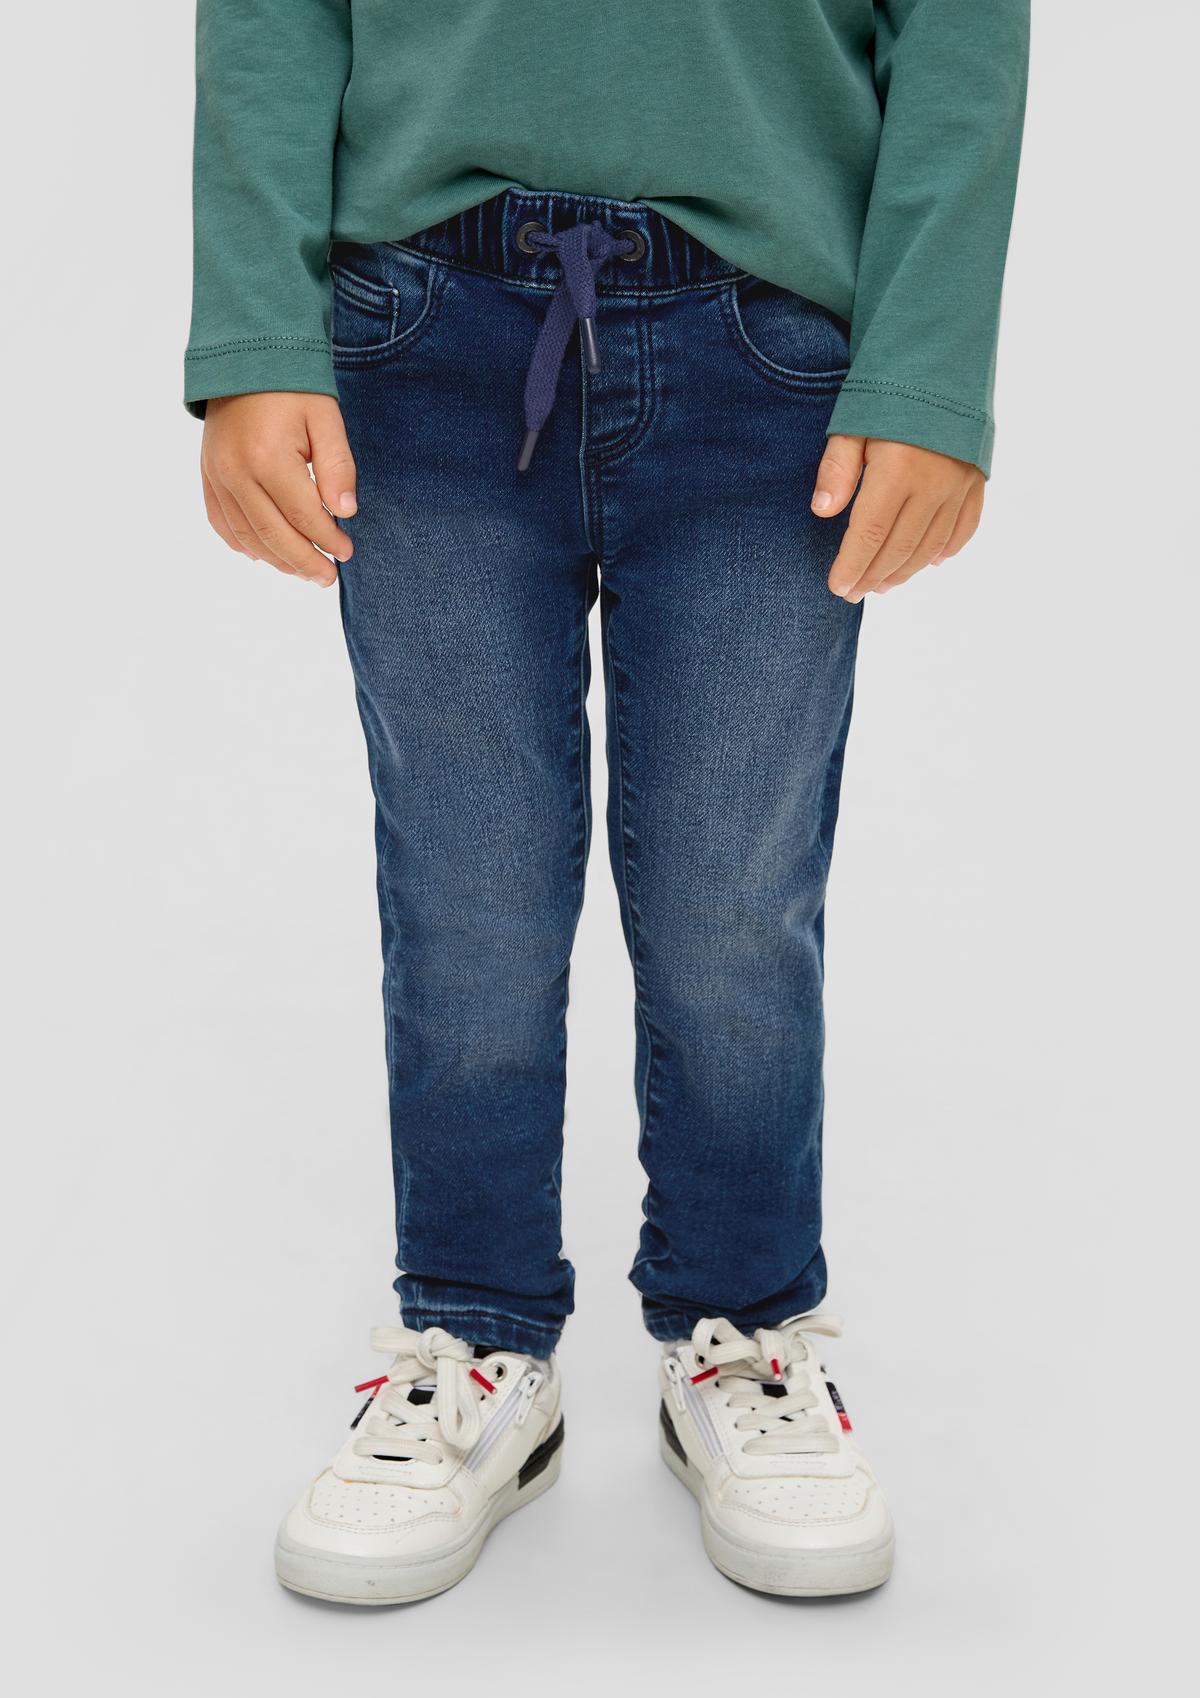 Tracksuit Style: Brad jeans with an elasticated waistband